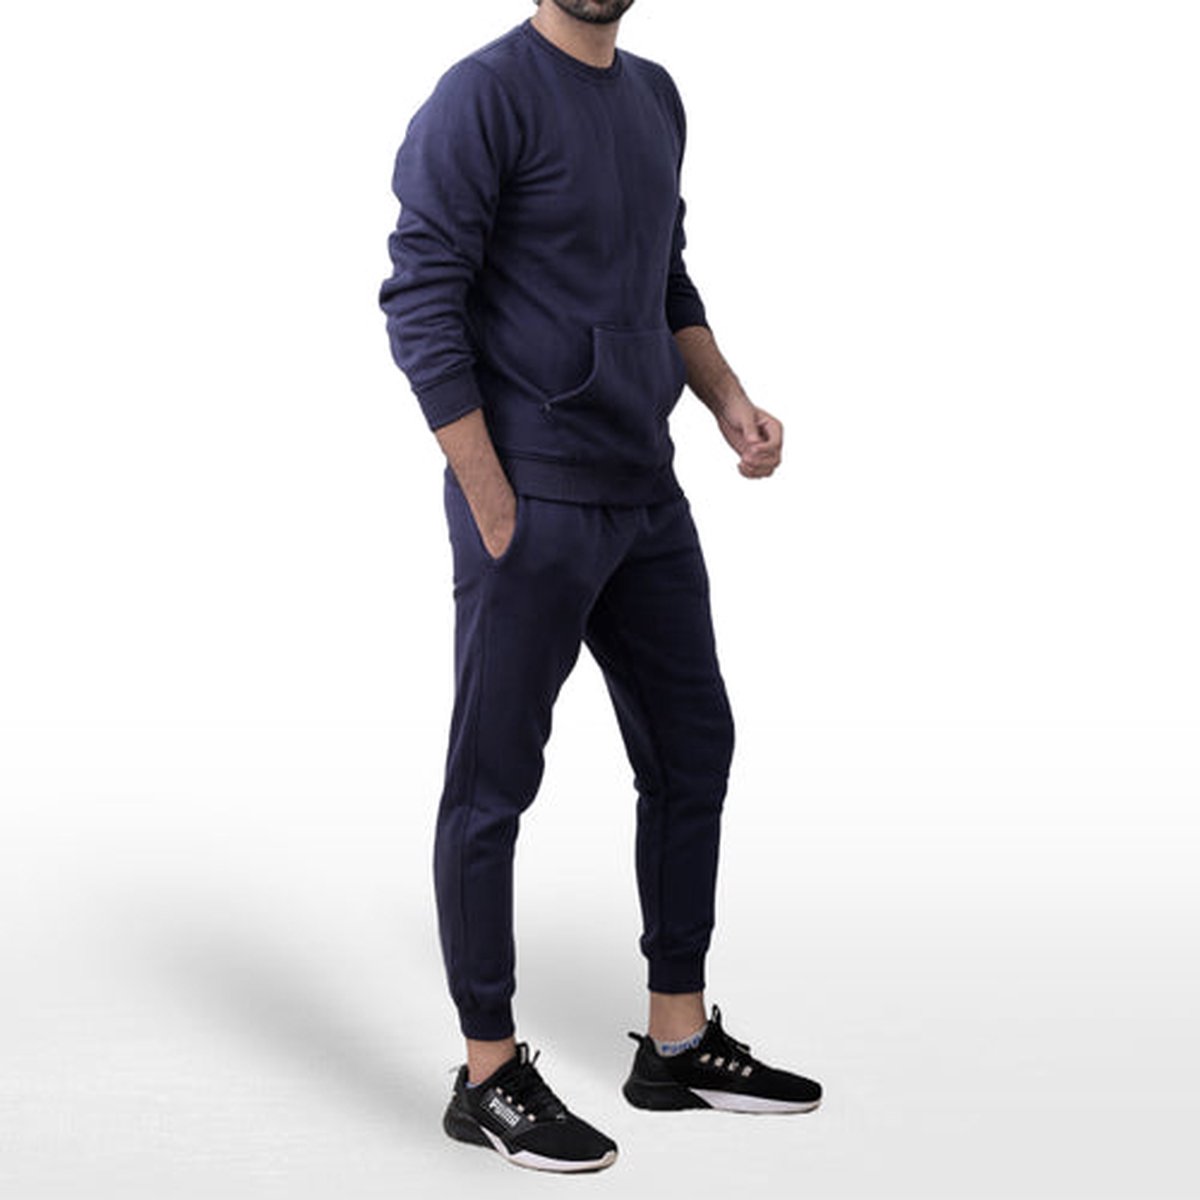 ICONICX Mens Plain Tracksuit Fleece Pullover Sweatshirt with Trousers Cotton Jogging Suit Exercise, Fitness, Boxing MMA